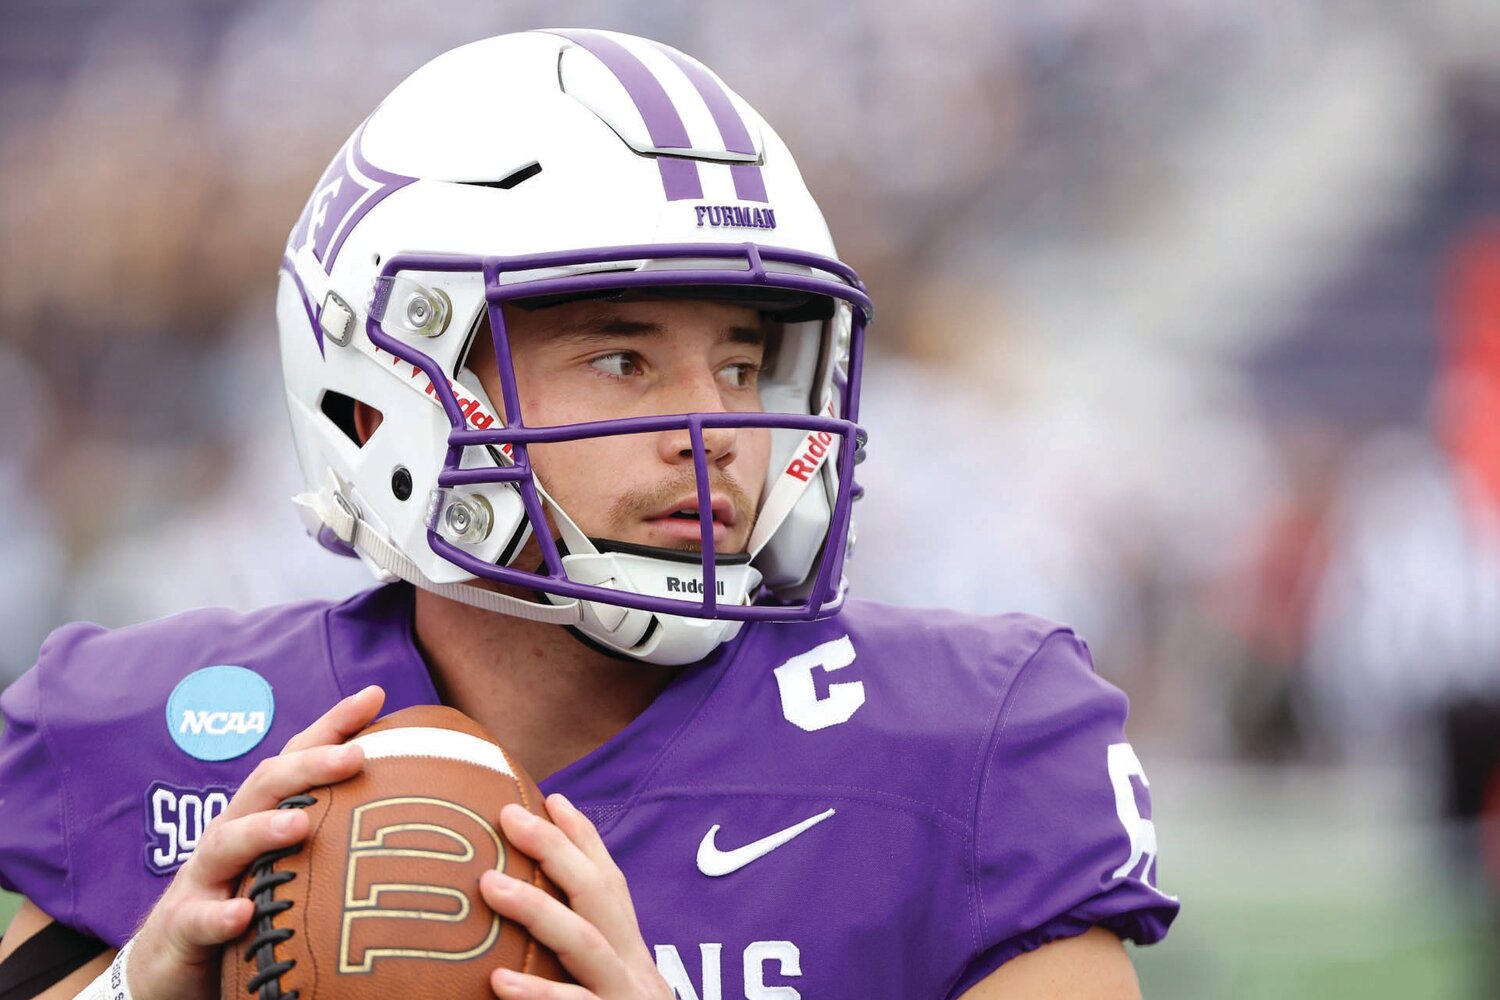 Furman graduate quarterback Tyler Huff returned from a two week hiatus for an injury to lead the Paladins to a 26-7 FCS playoff win over Chattanooga. Furman will travel to play Montana on Friday in the FCS quarterfinals. The game will be televised at 9 p.m. EST on ESPN2.